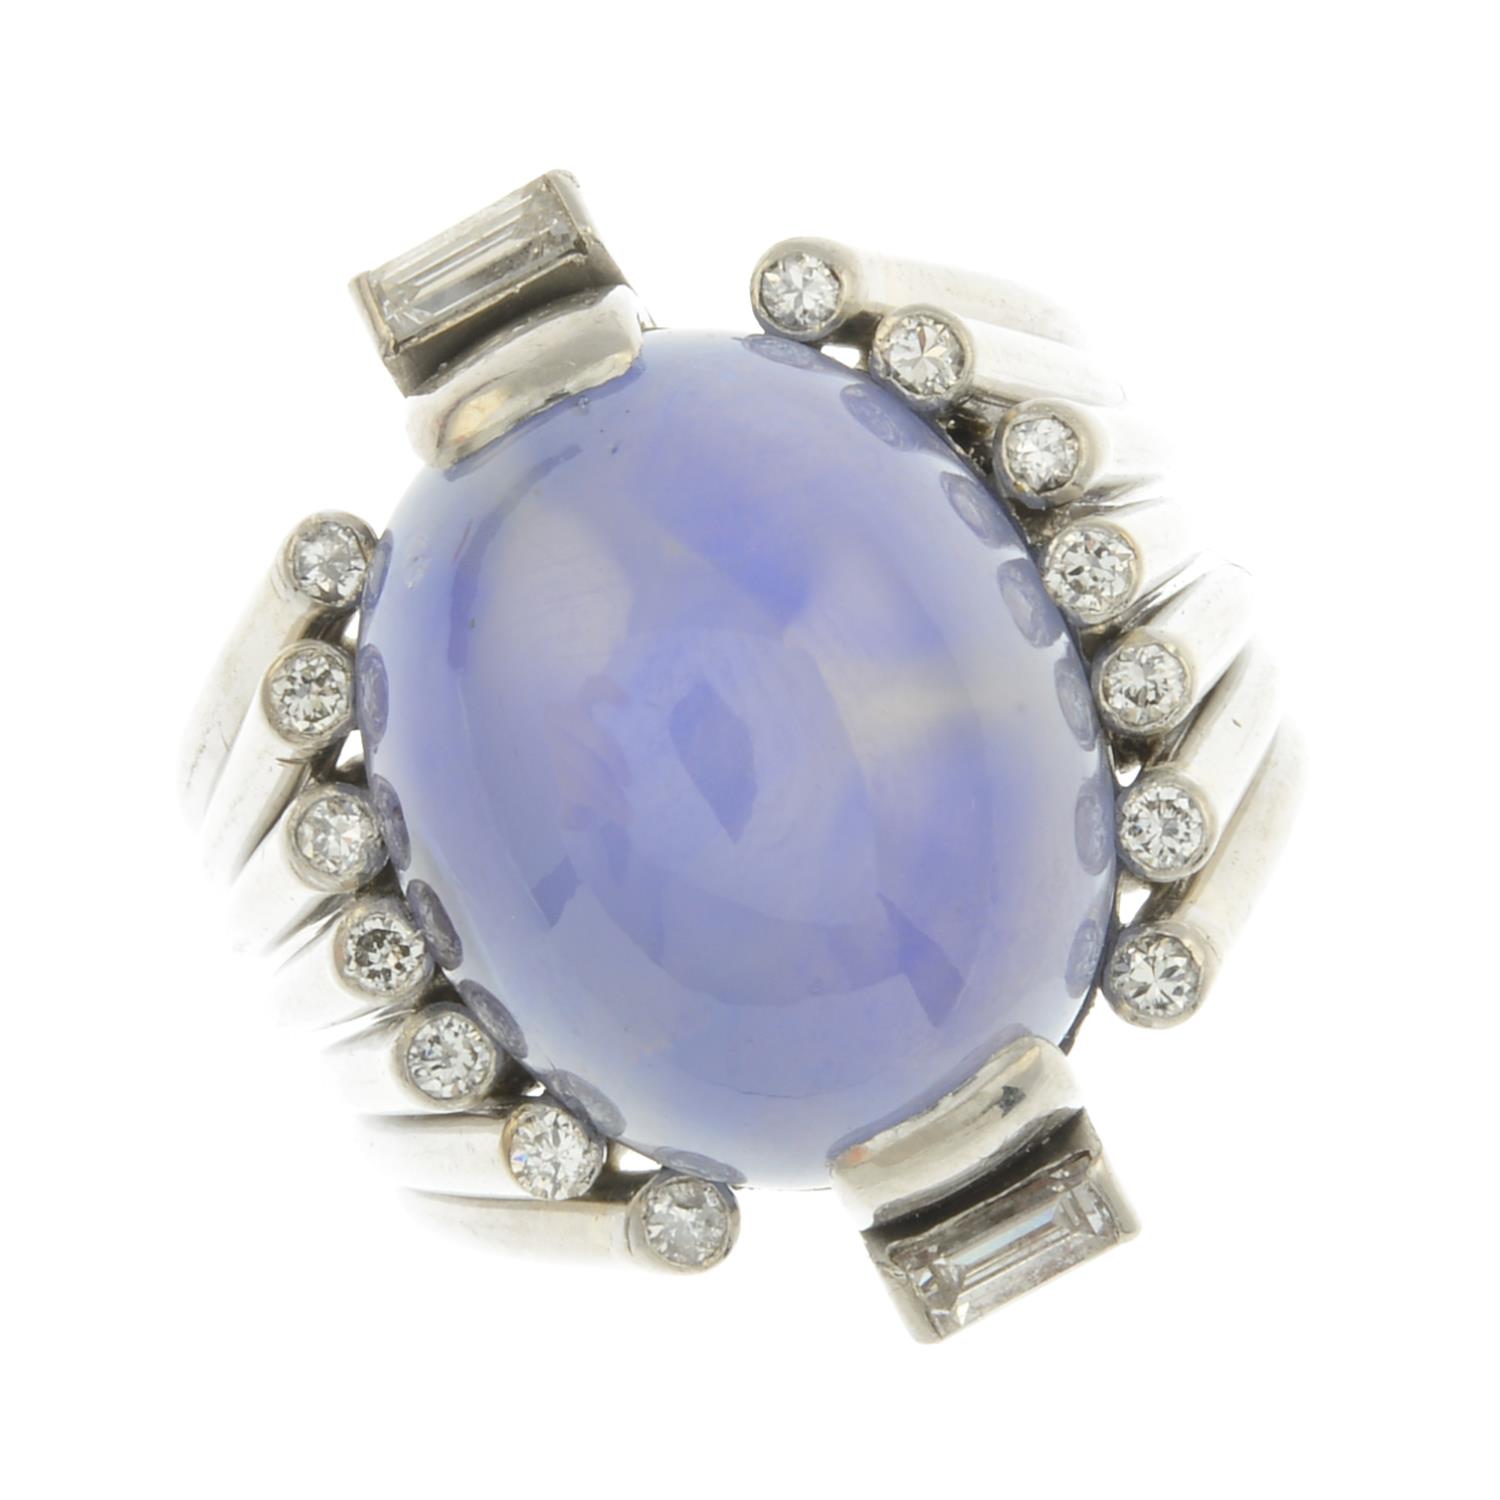 A mid 20th century 18ct gold star sapphire and diamond ring.